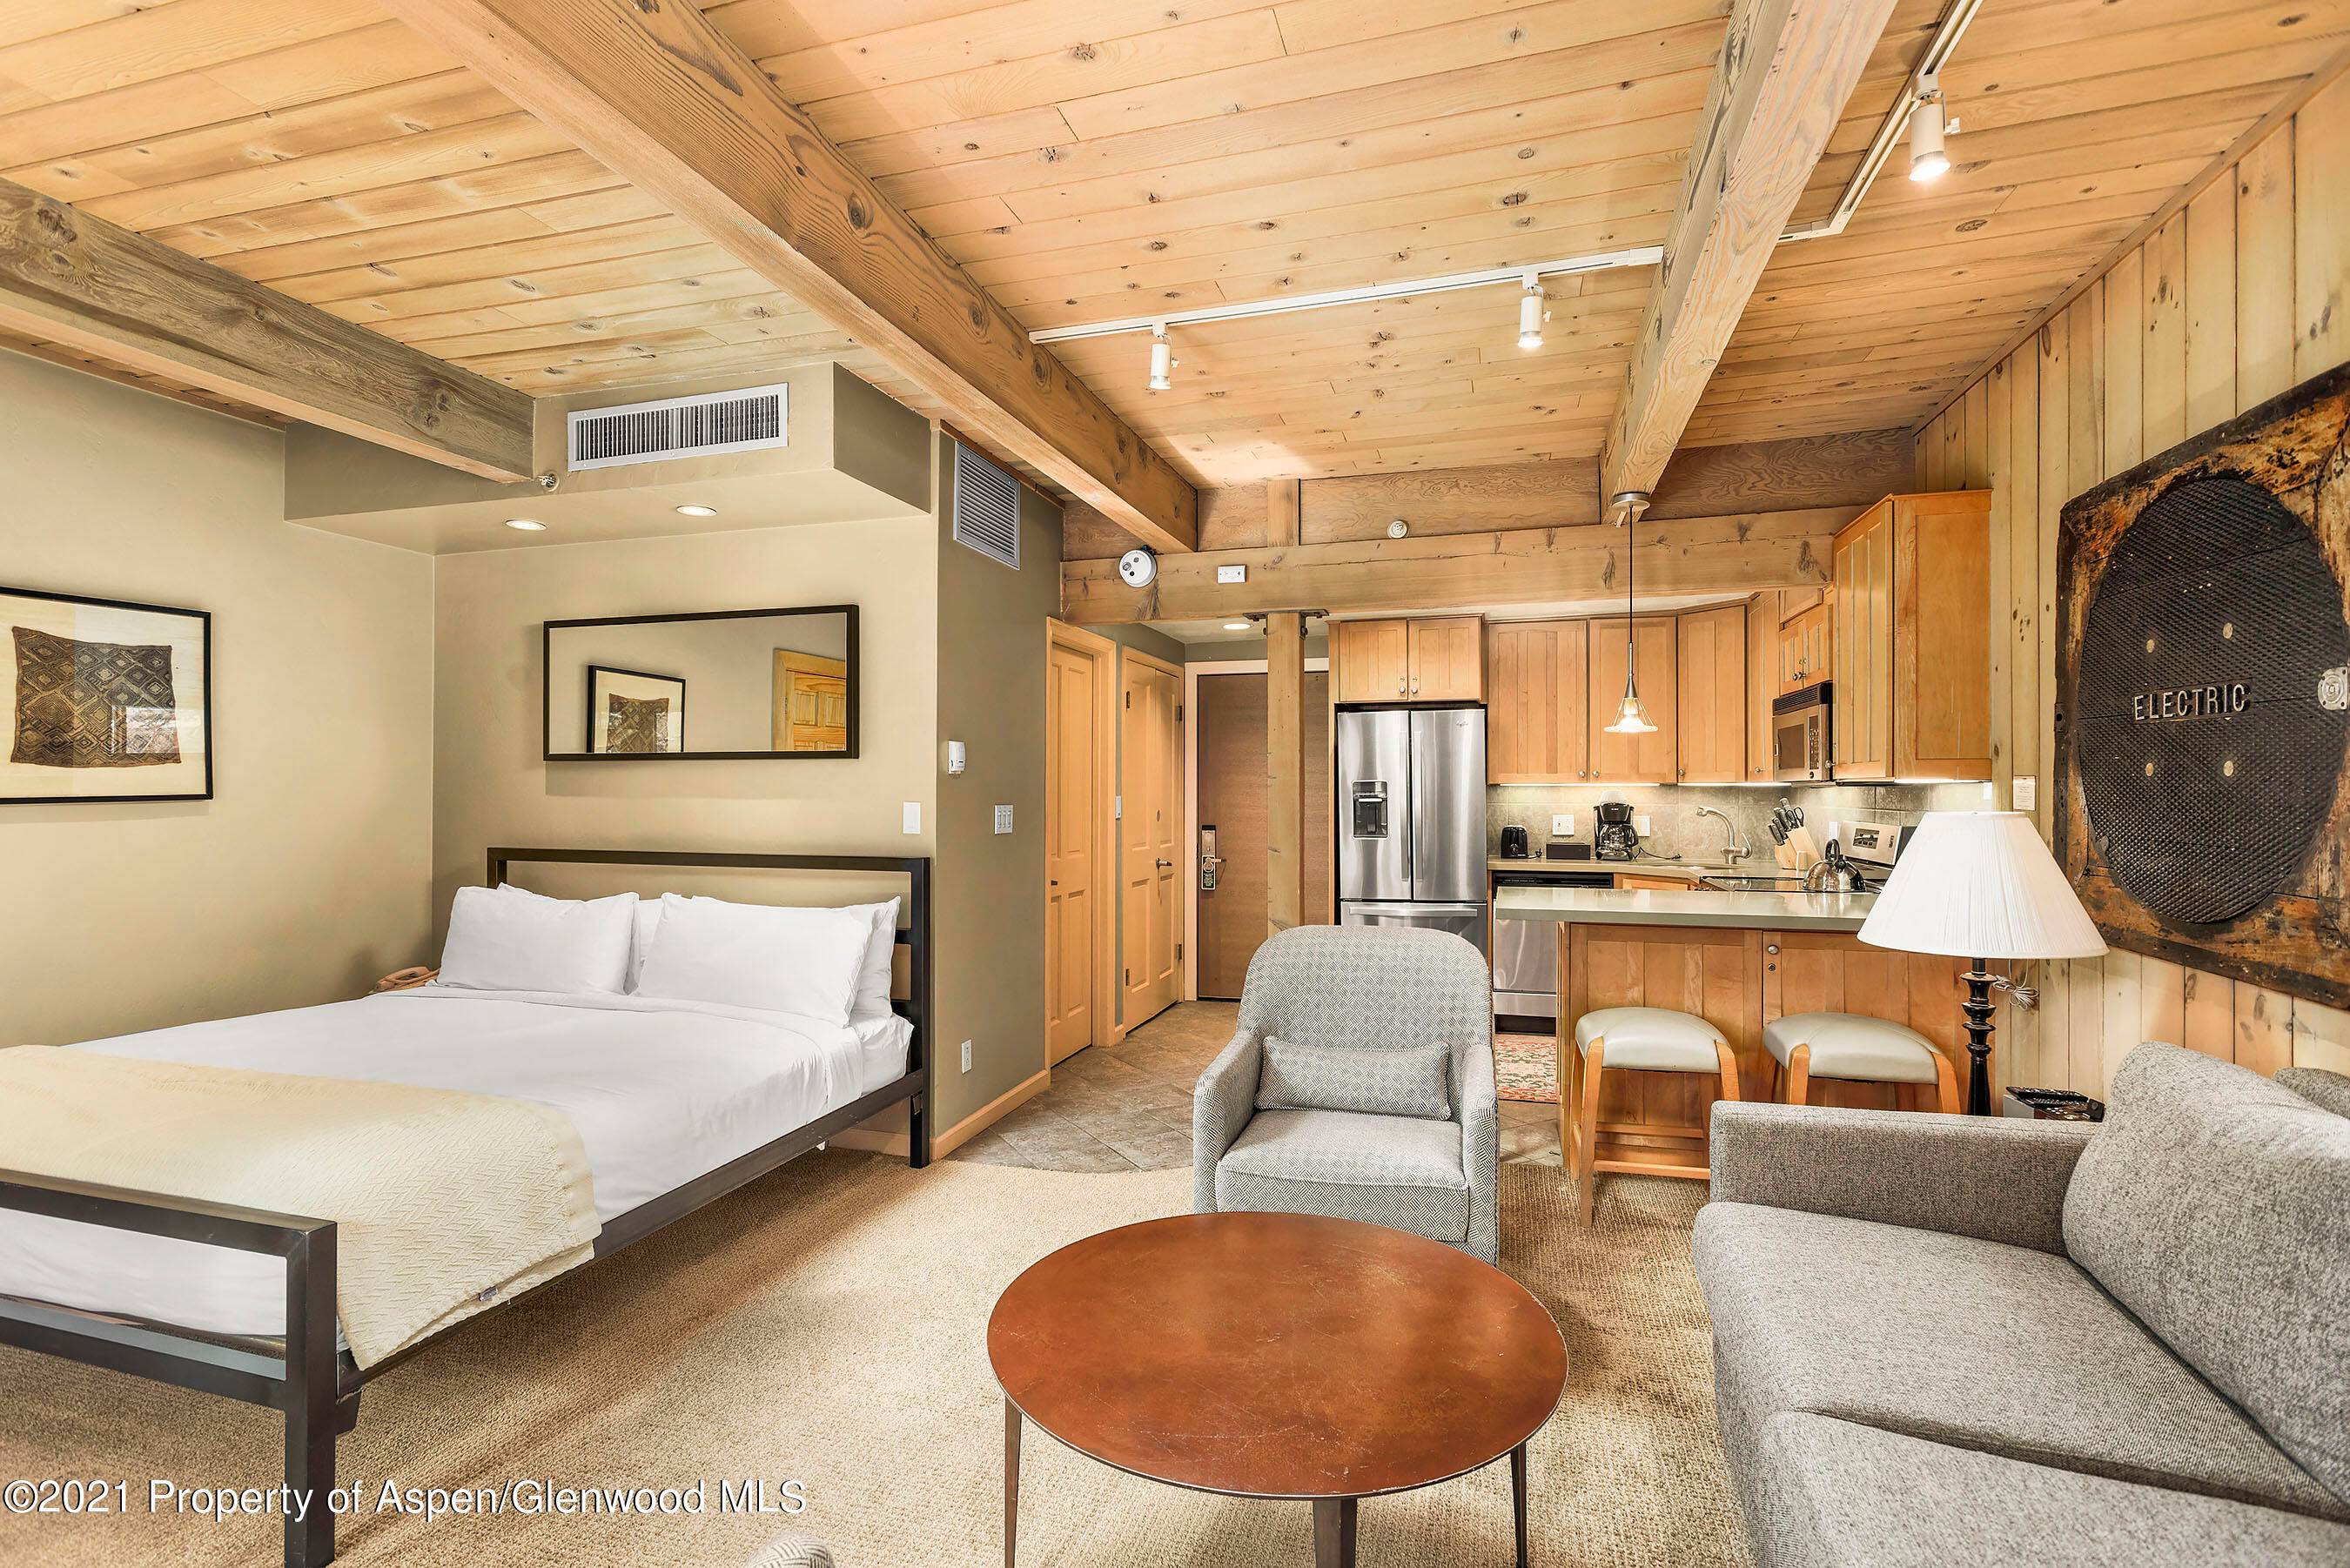 Great opportunity to own two side by side Aspen Square Condominium units with a connecting door allowing for the ultimate flexibility.